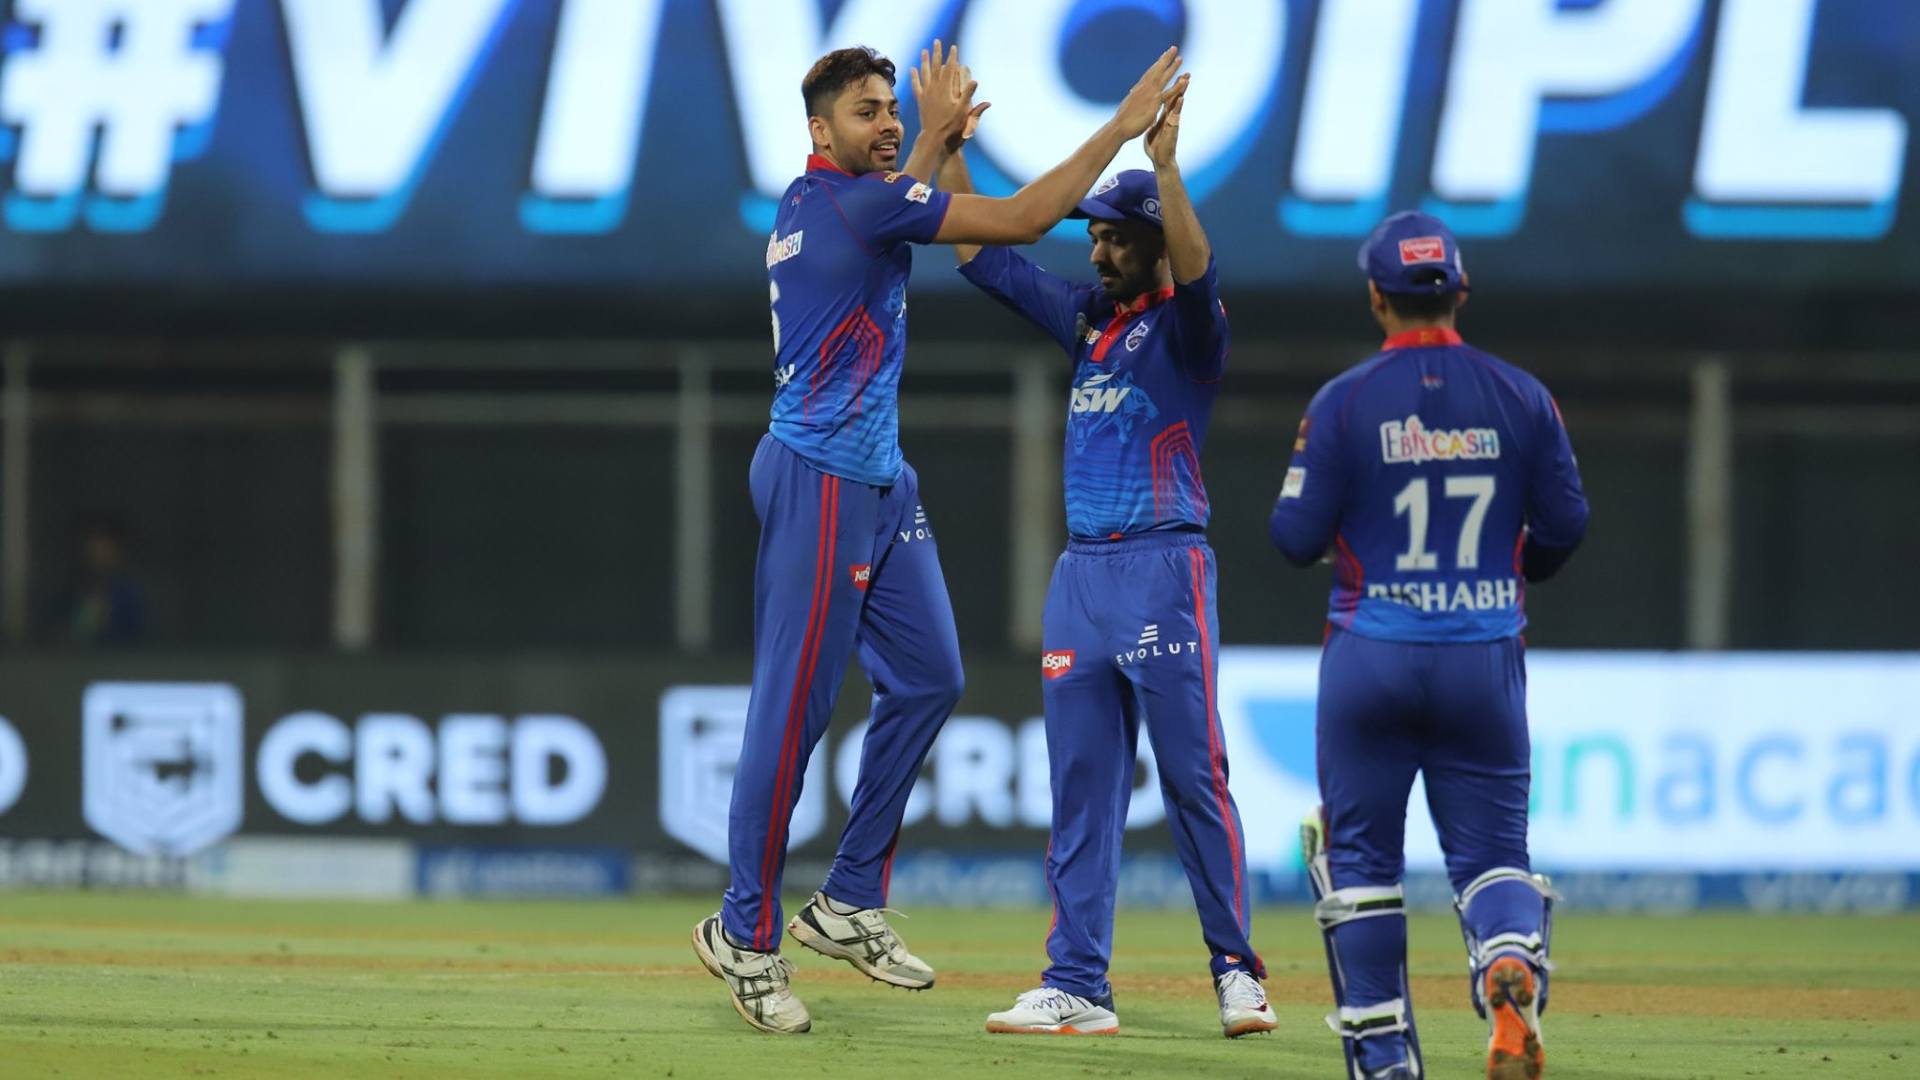 Avesh Khan celebrates the fall of a wicket. (Image credit: Facebook/IPL)